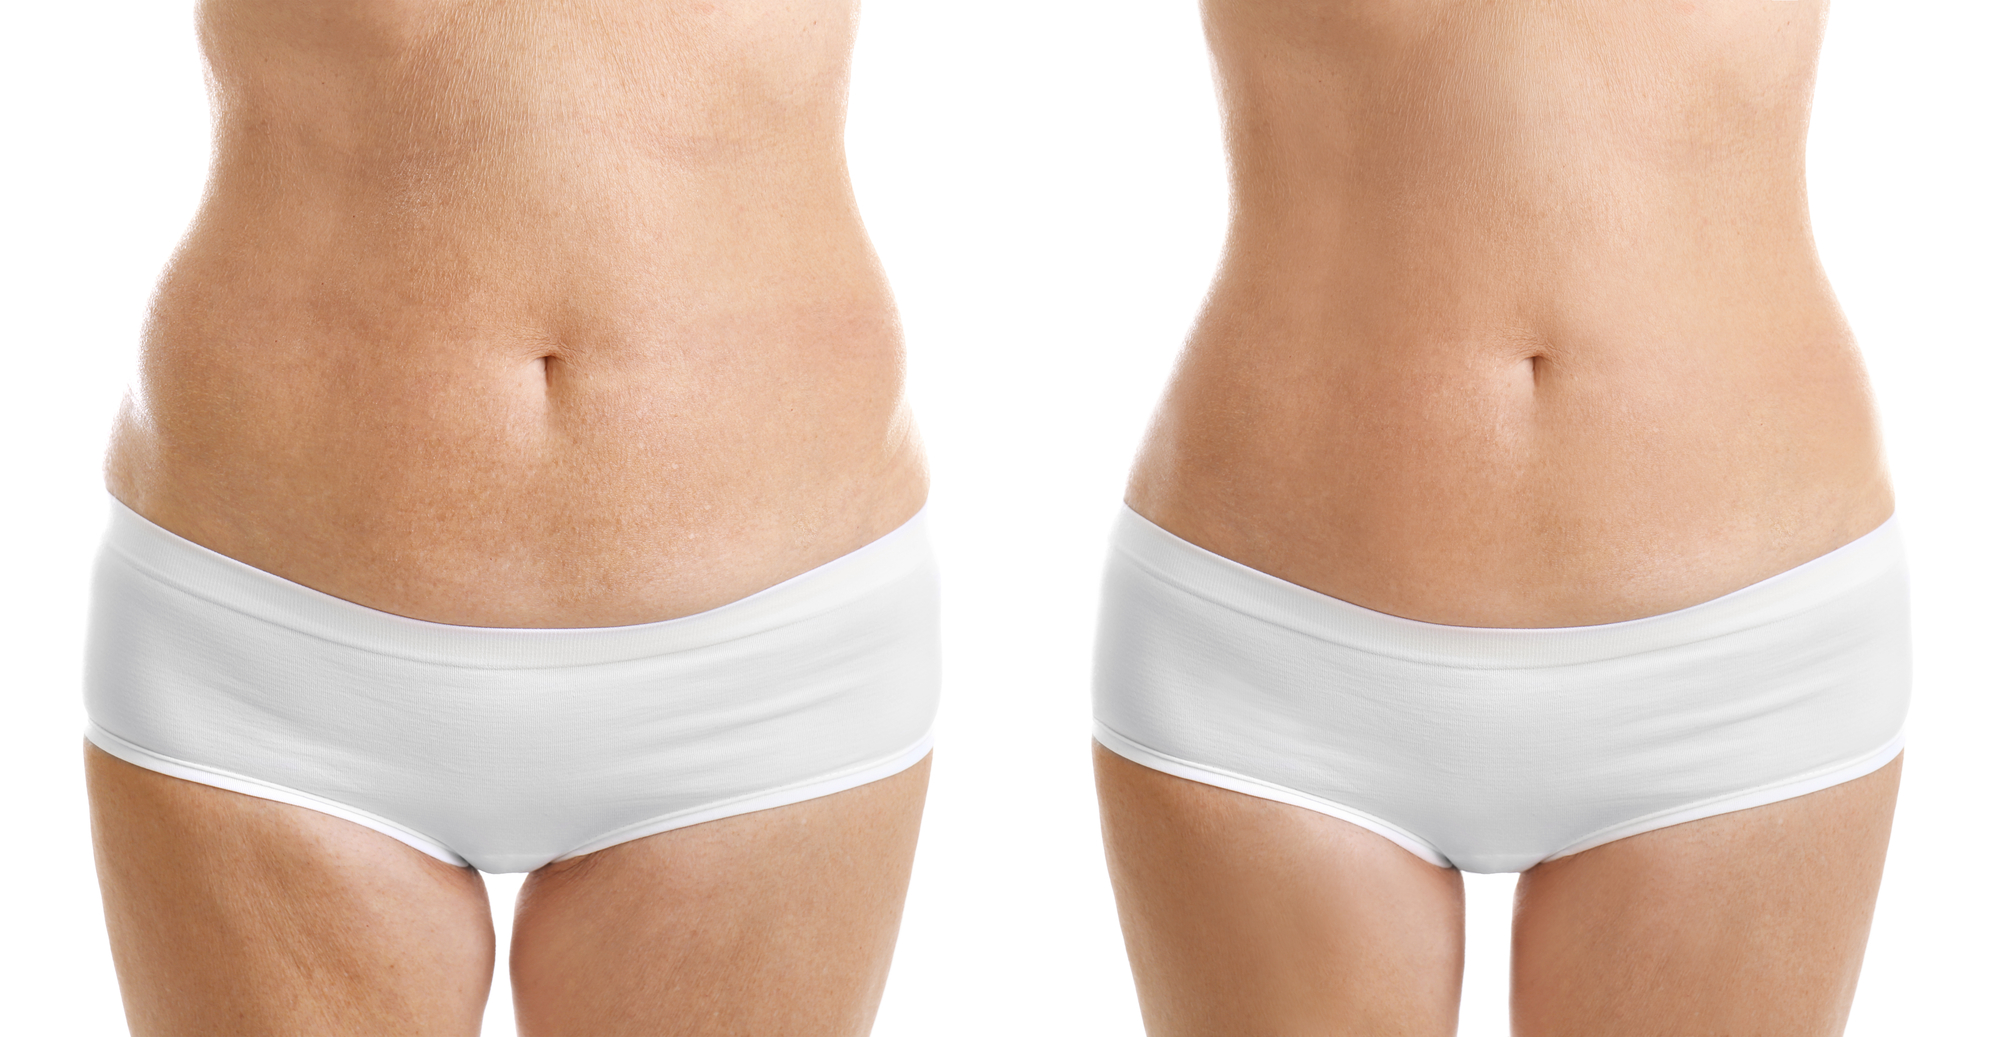 Liposuction vs. Liposculpture: Which Option is Best For Your Body?